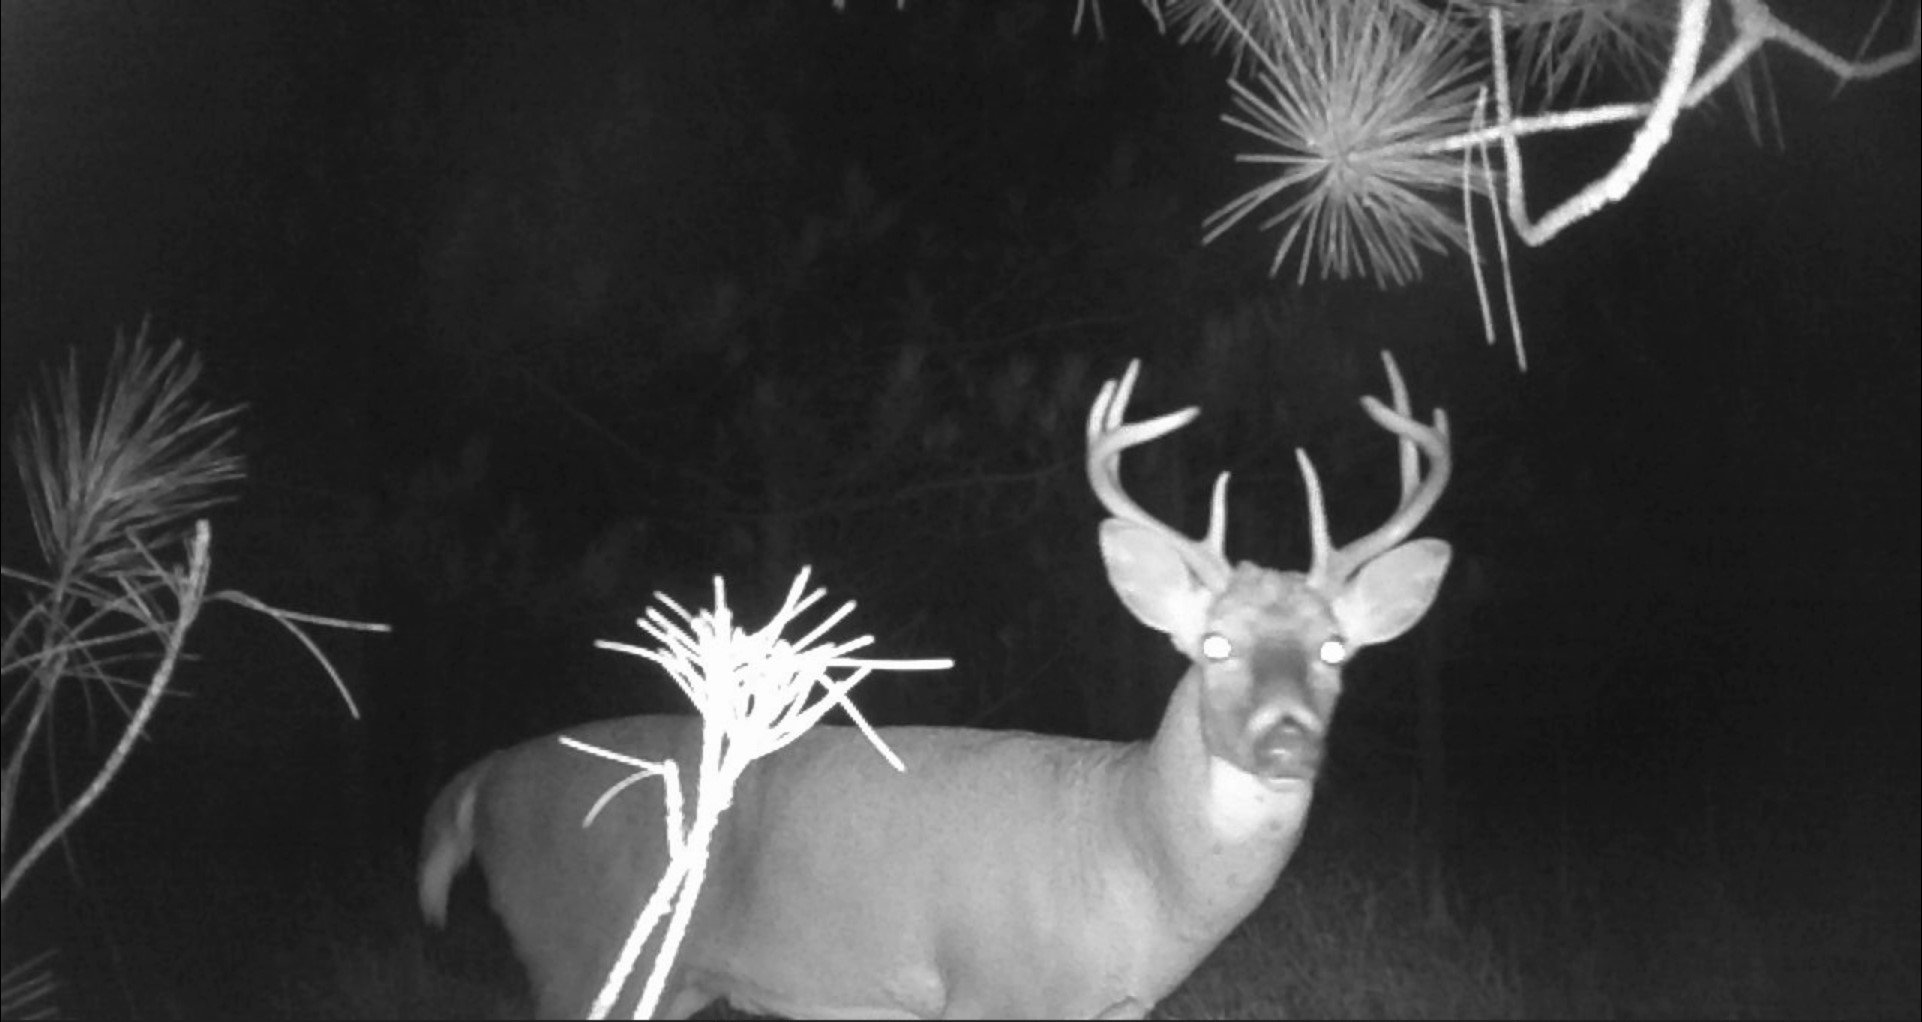 in black and white, a buck is captured by a motion camera staring directly at it with glowing eyes